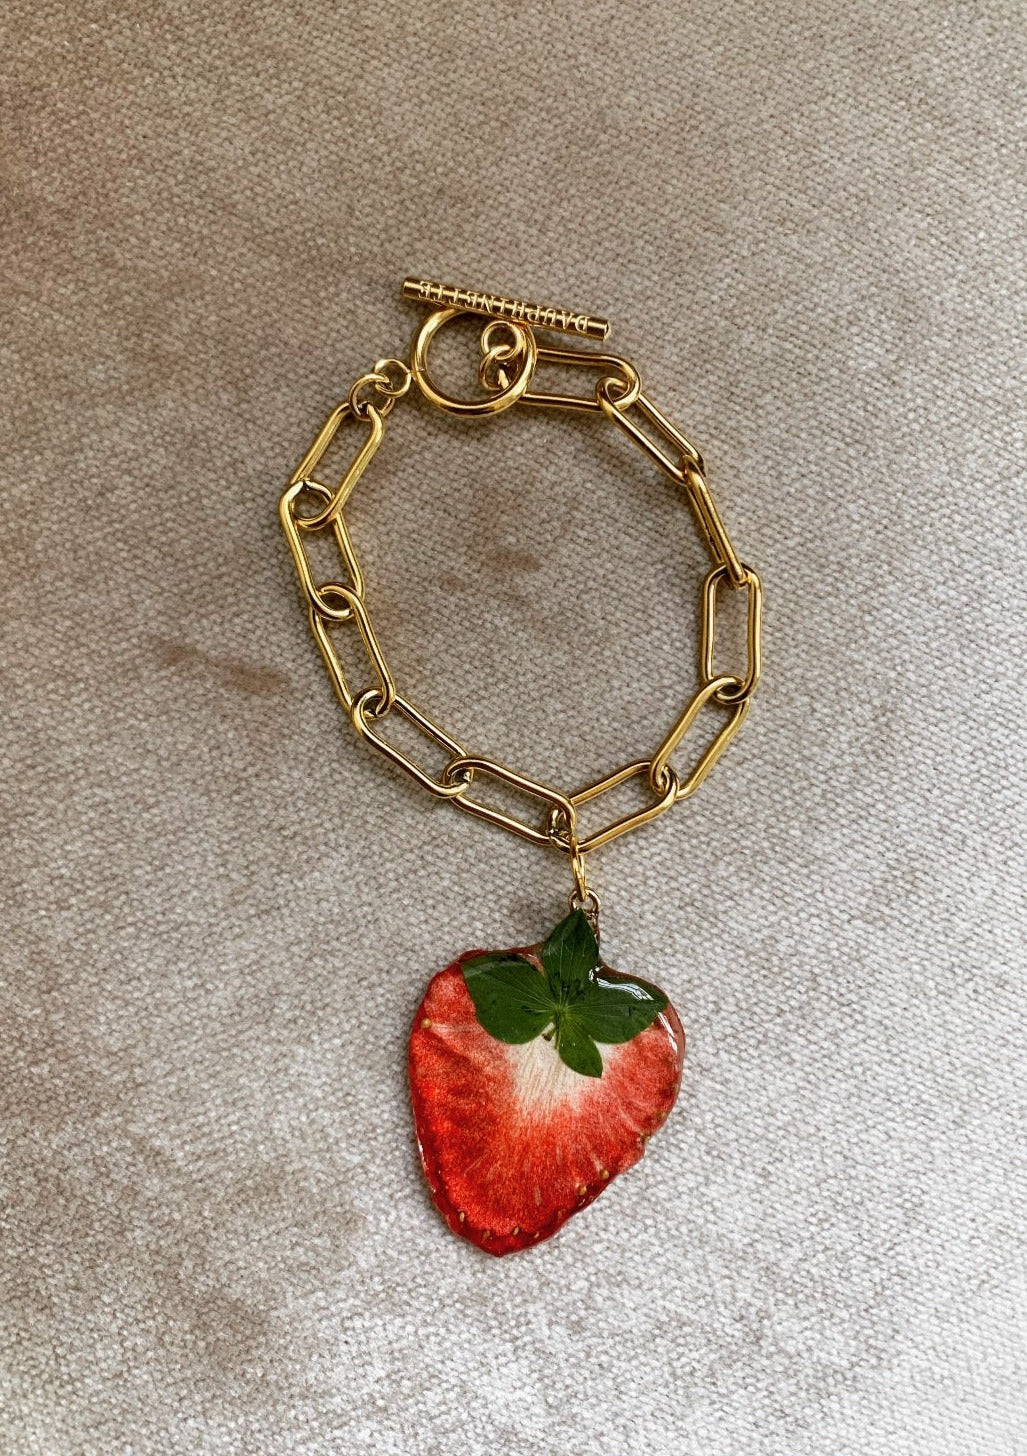 A preserved strawberry, suspended from a gold-plated stainless steel Albert chain.